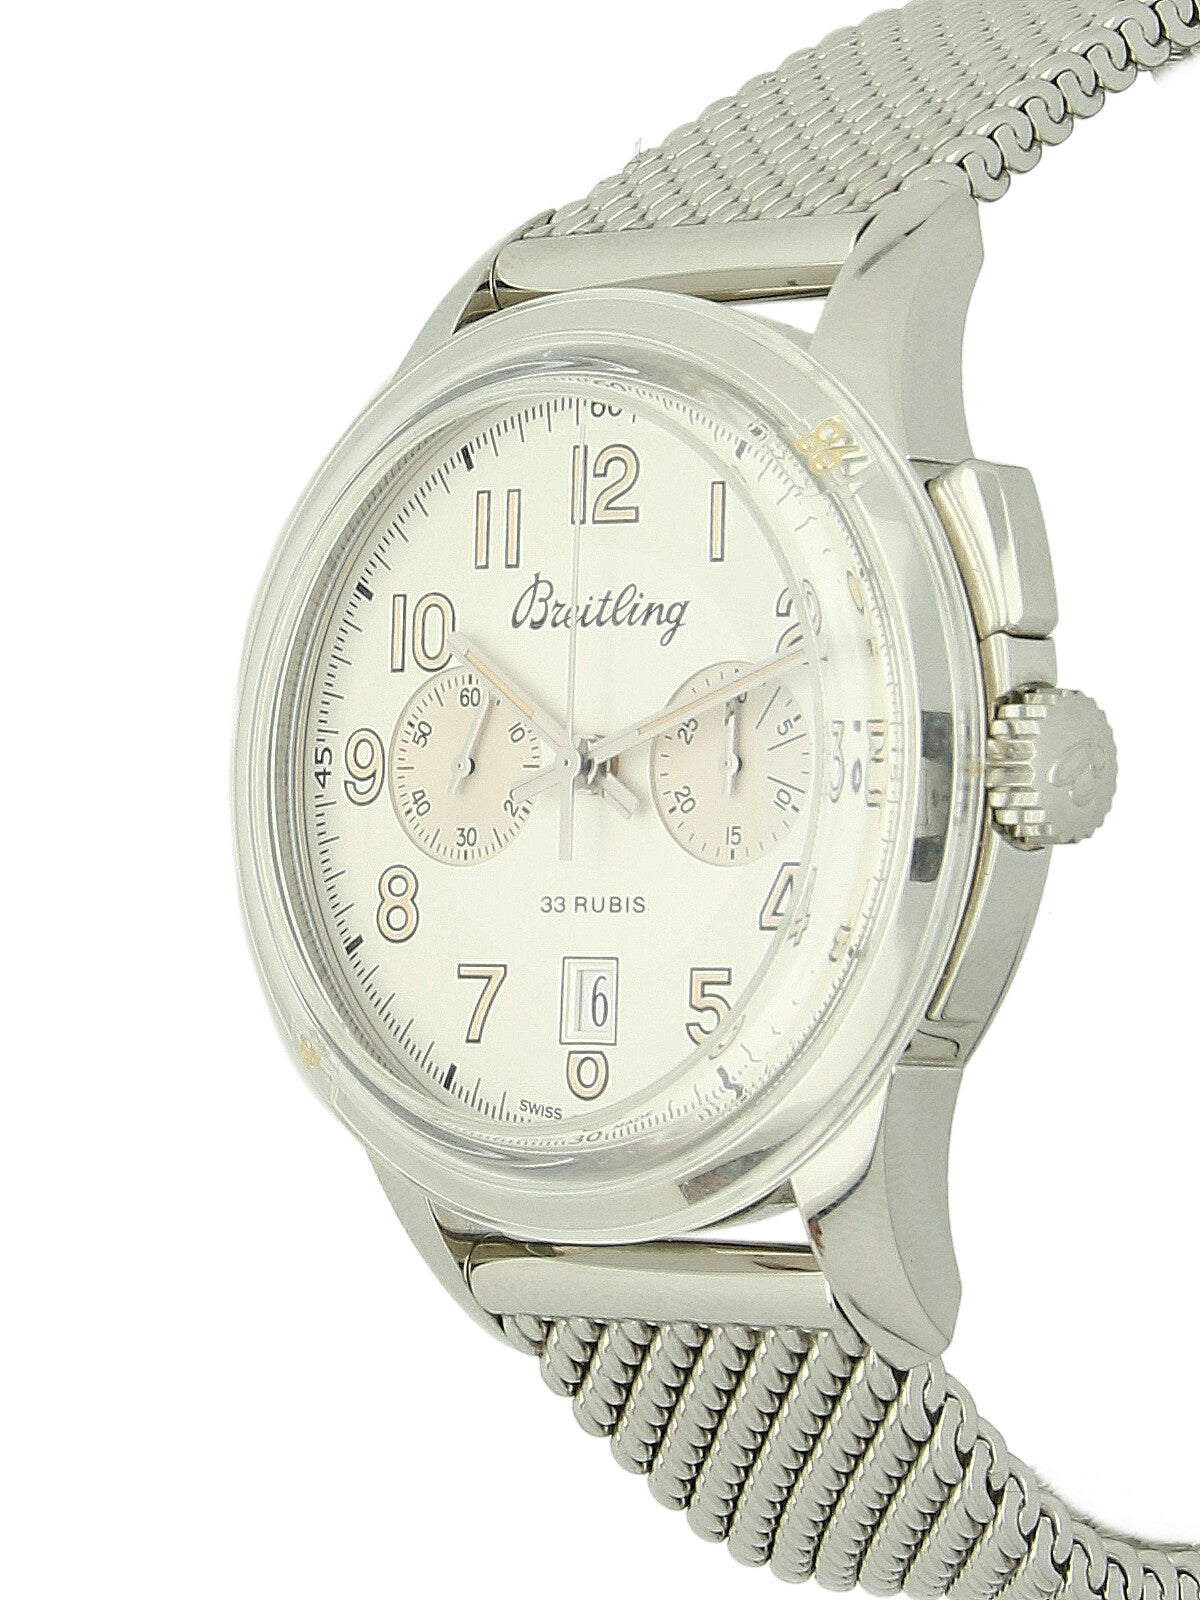 Pre Owned Breitling Transocean Manual Wind Chronograph Watch on Bracelet